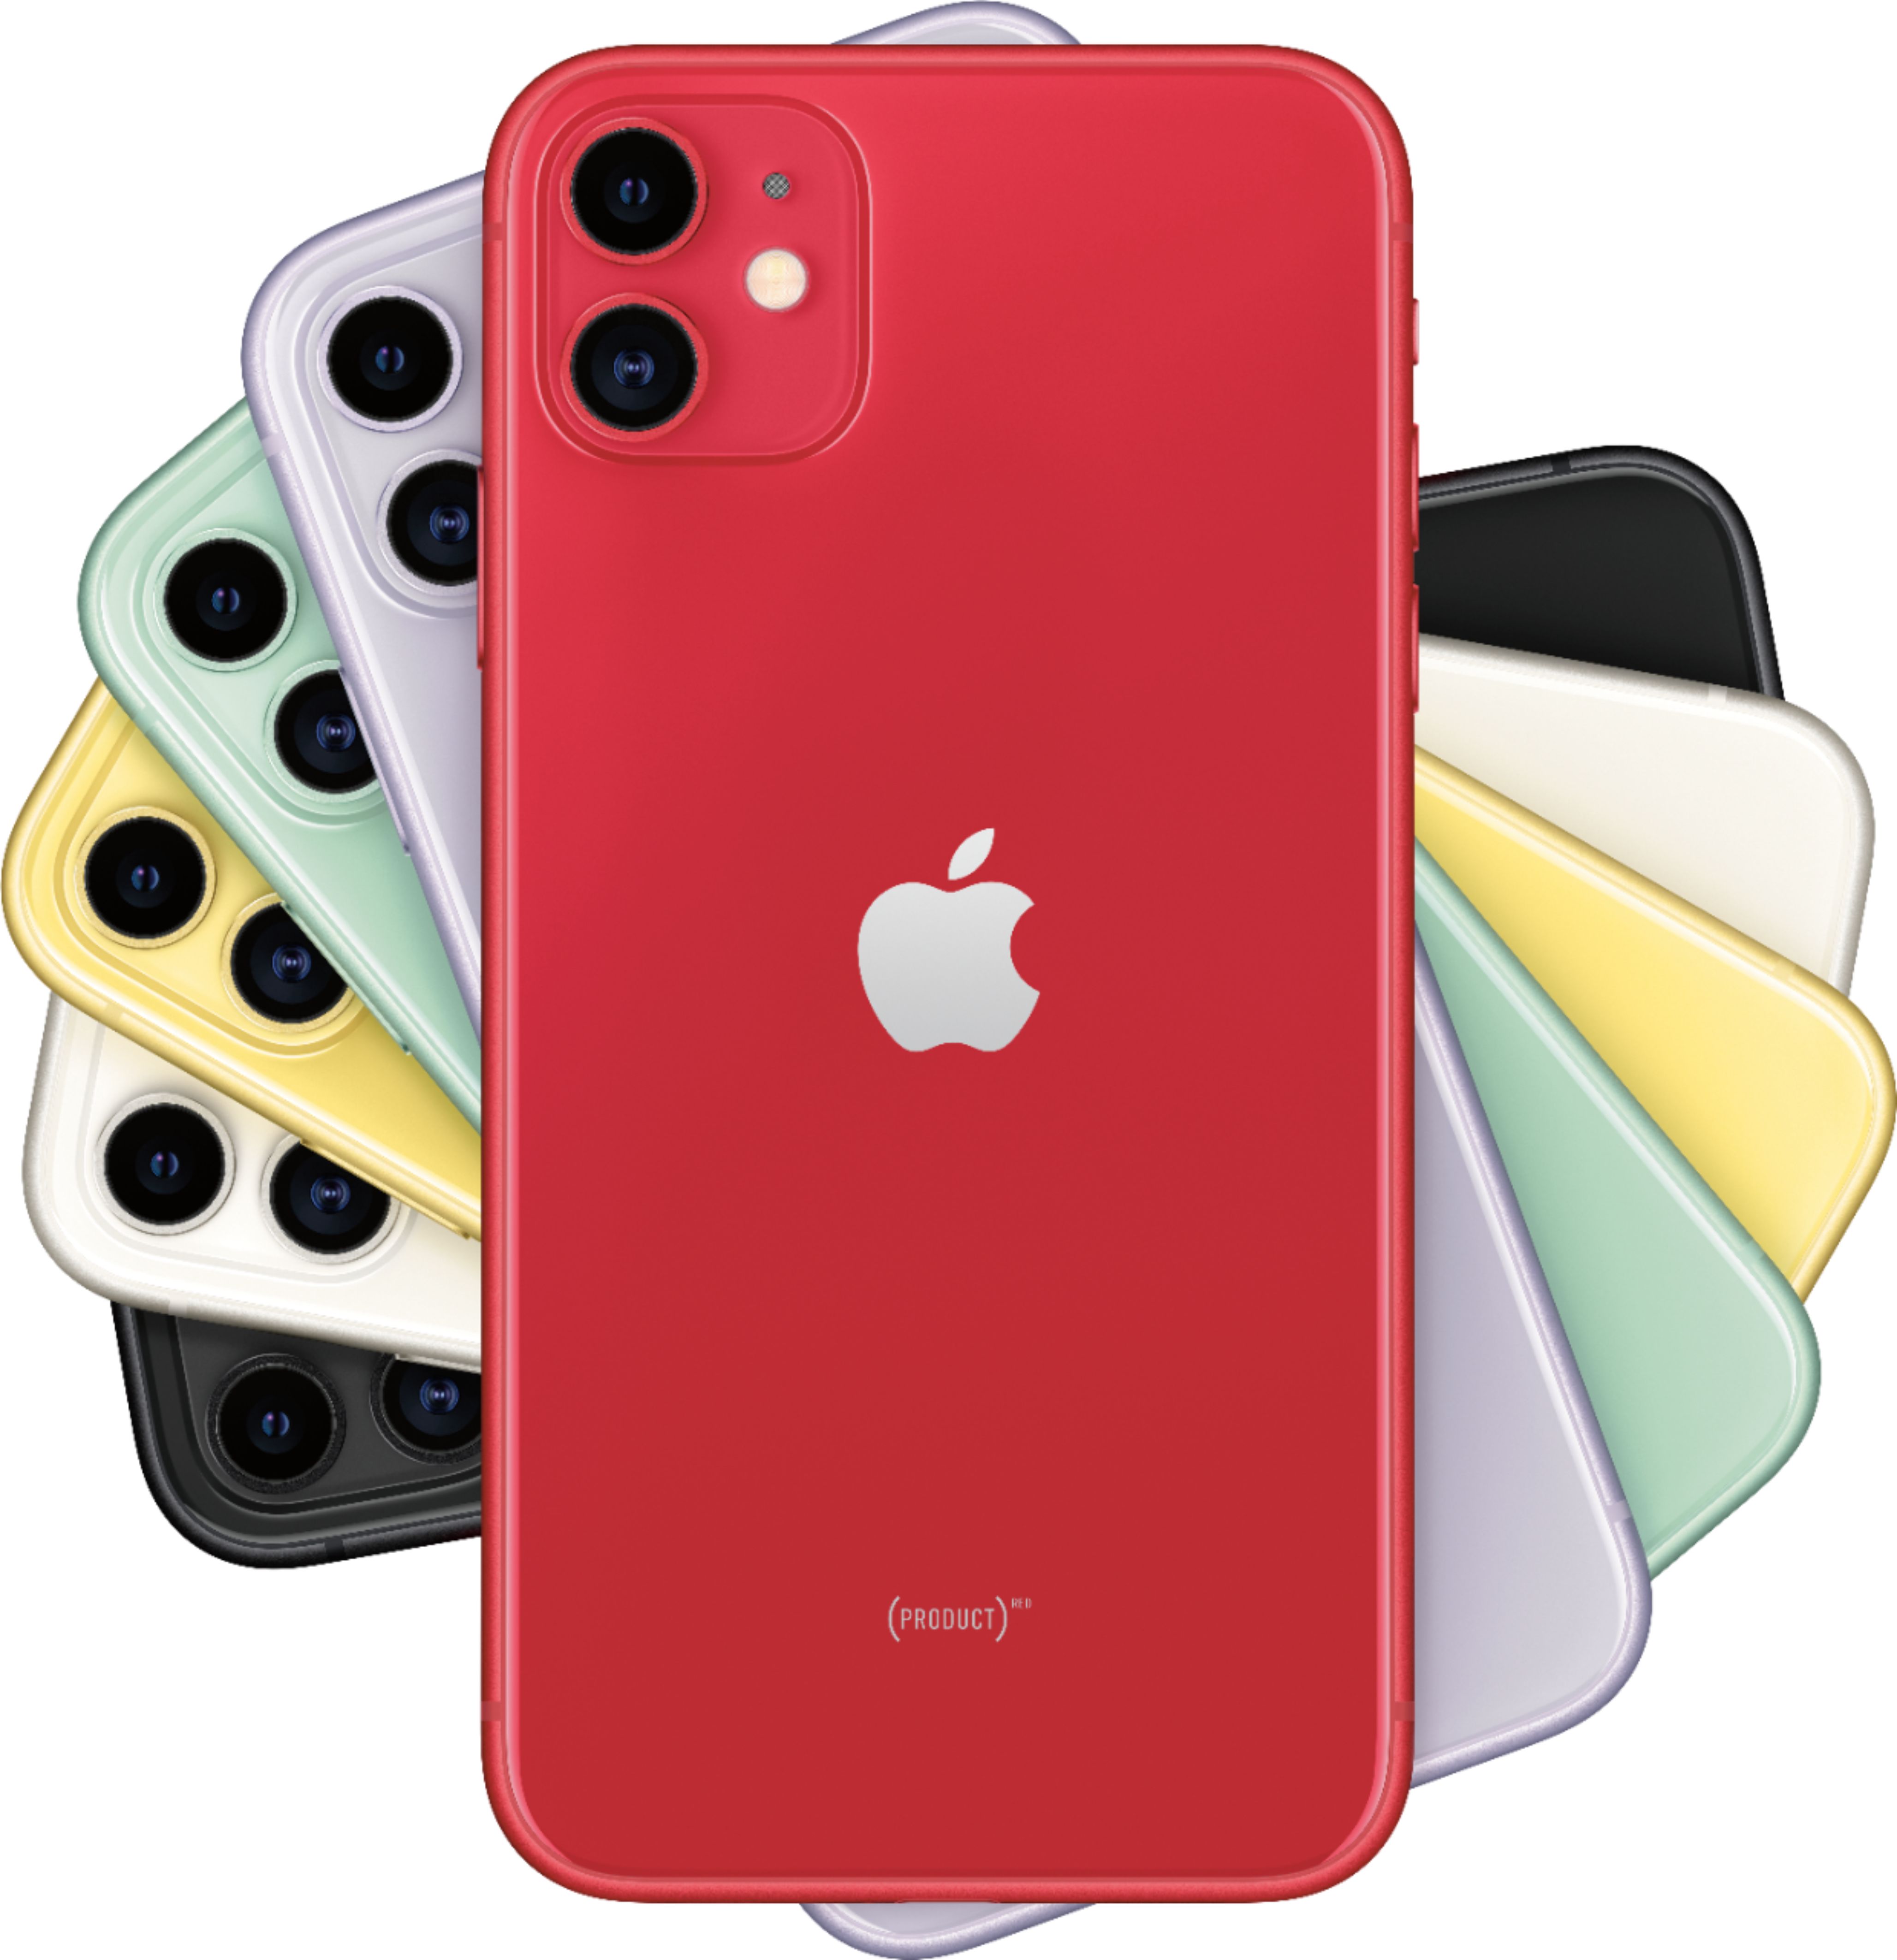 Best Buy: Apple iPhone 11 128GB (PRODUCT)RED (Verizon) MHD03LL/A